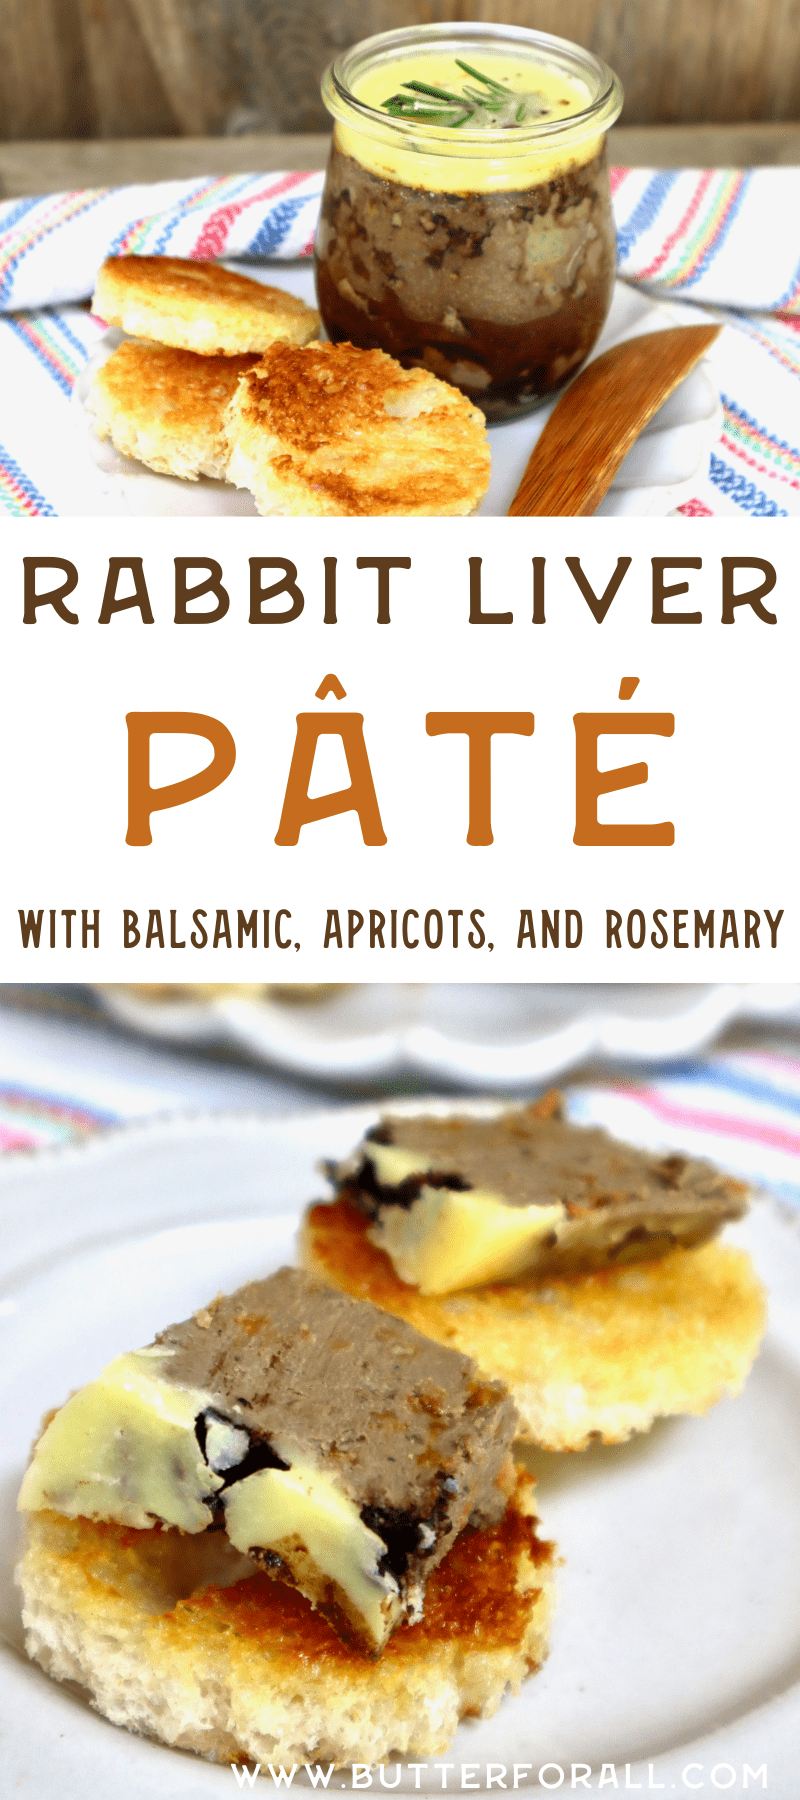 Rabbit liver pâté collage with text overlay.